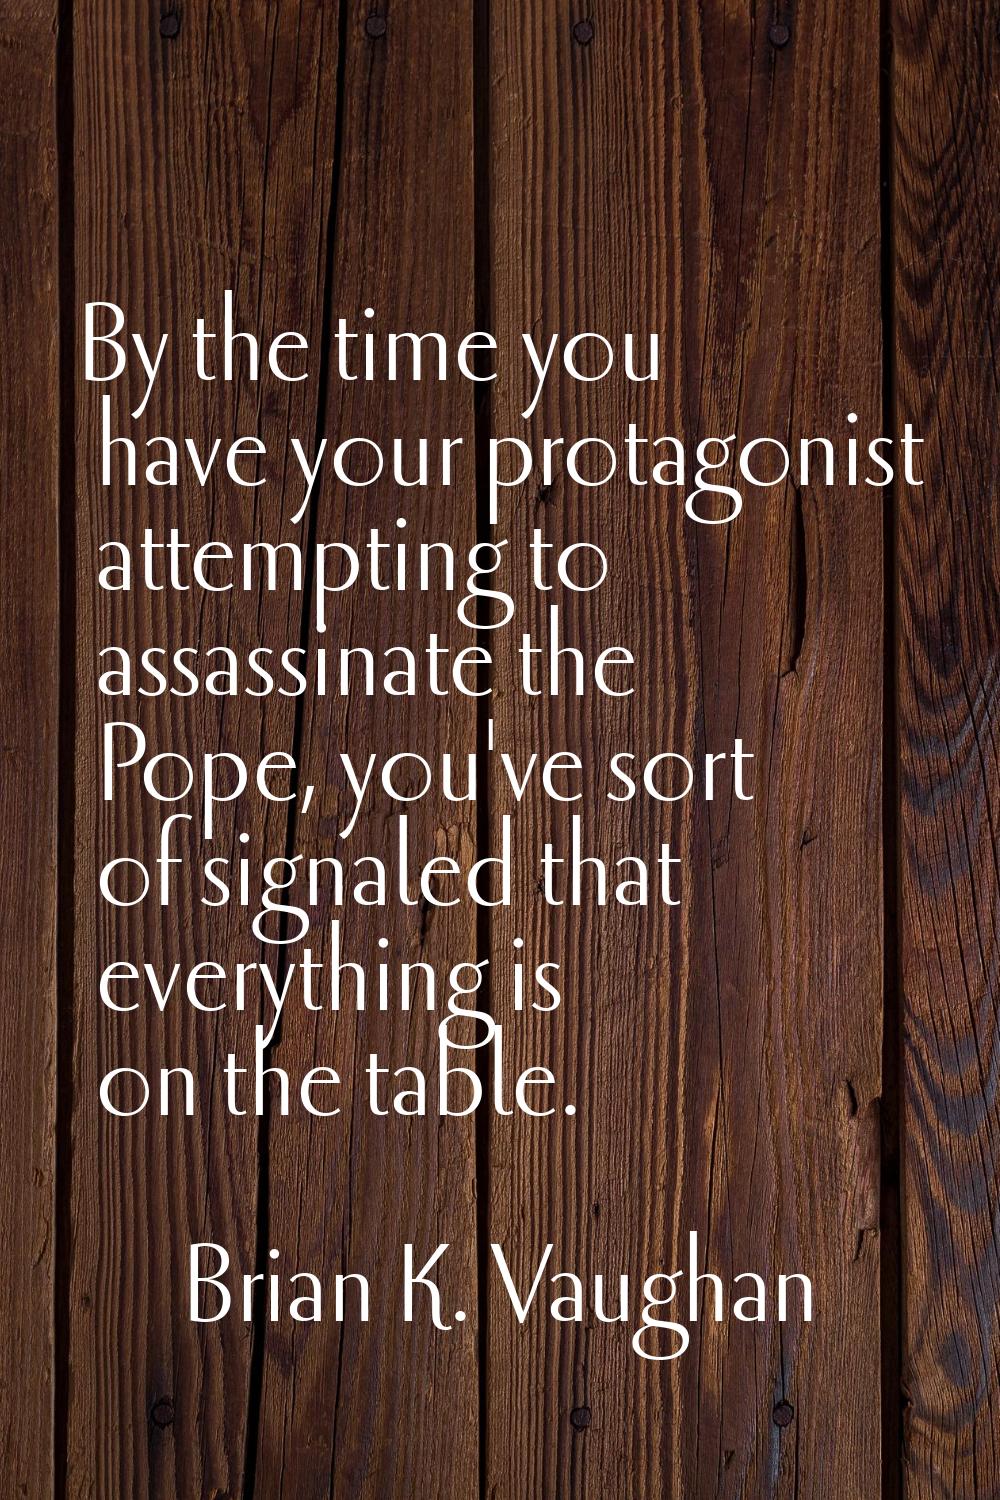 By the time you have your protagonist attempting to assassinate the Pope, you've sort of signaled t